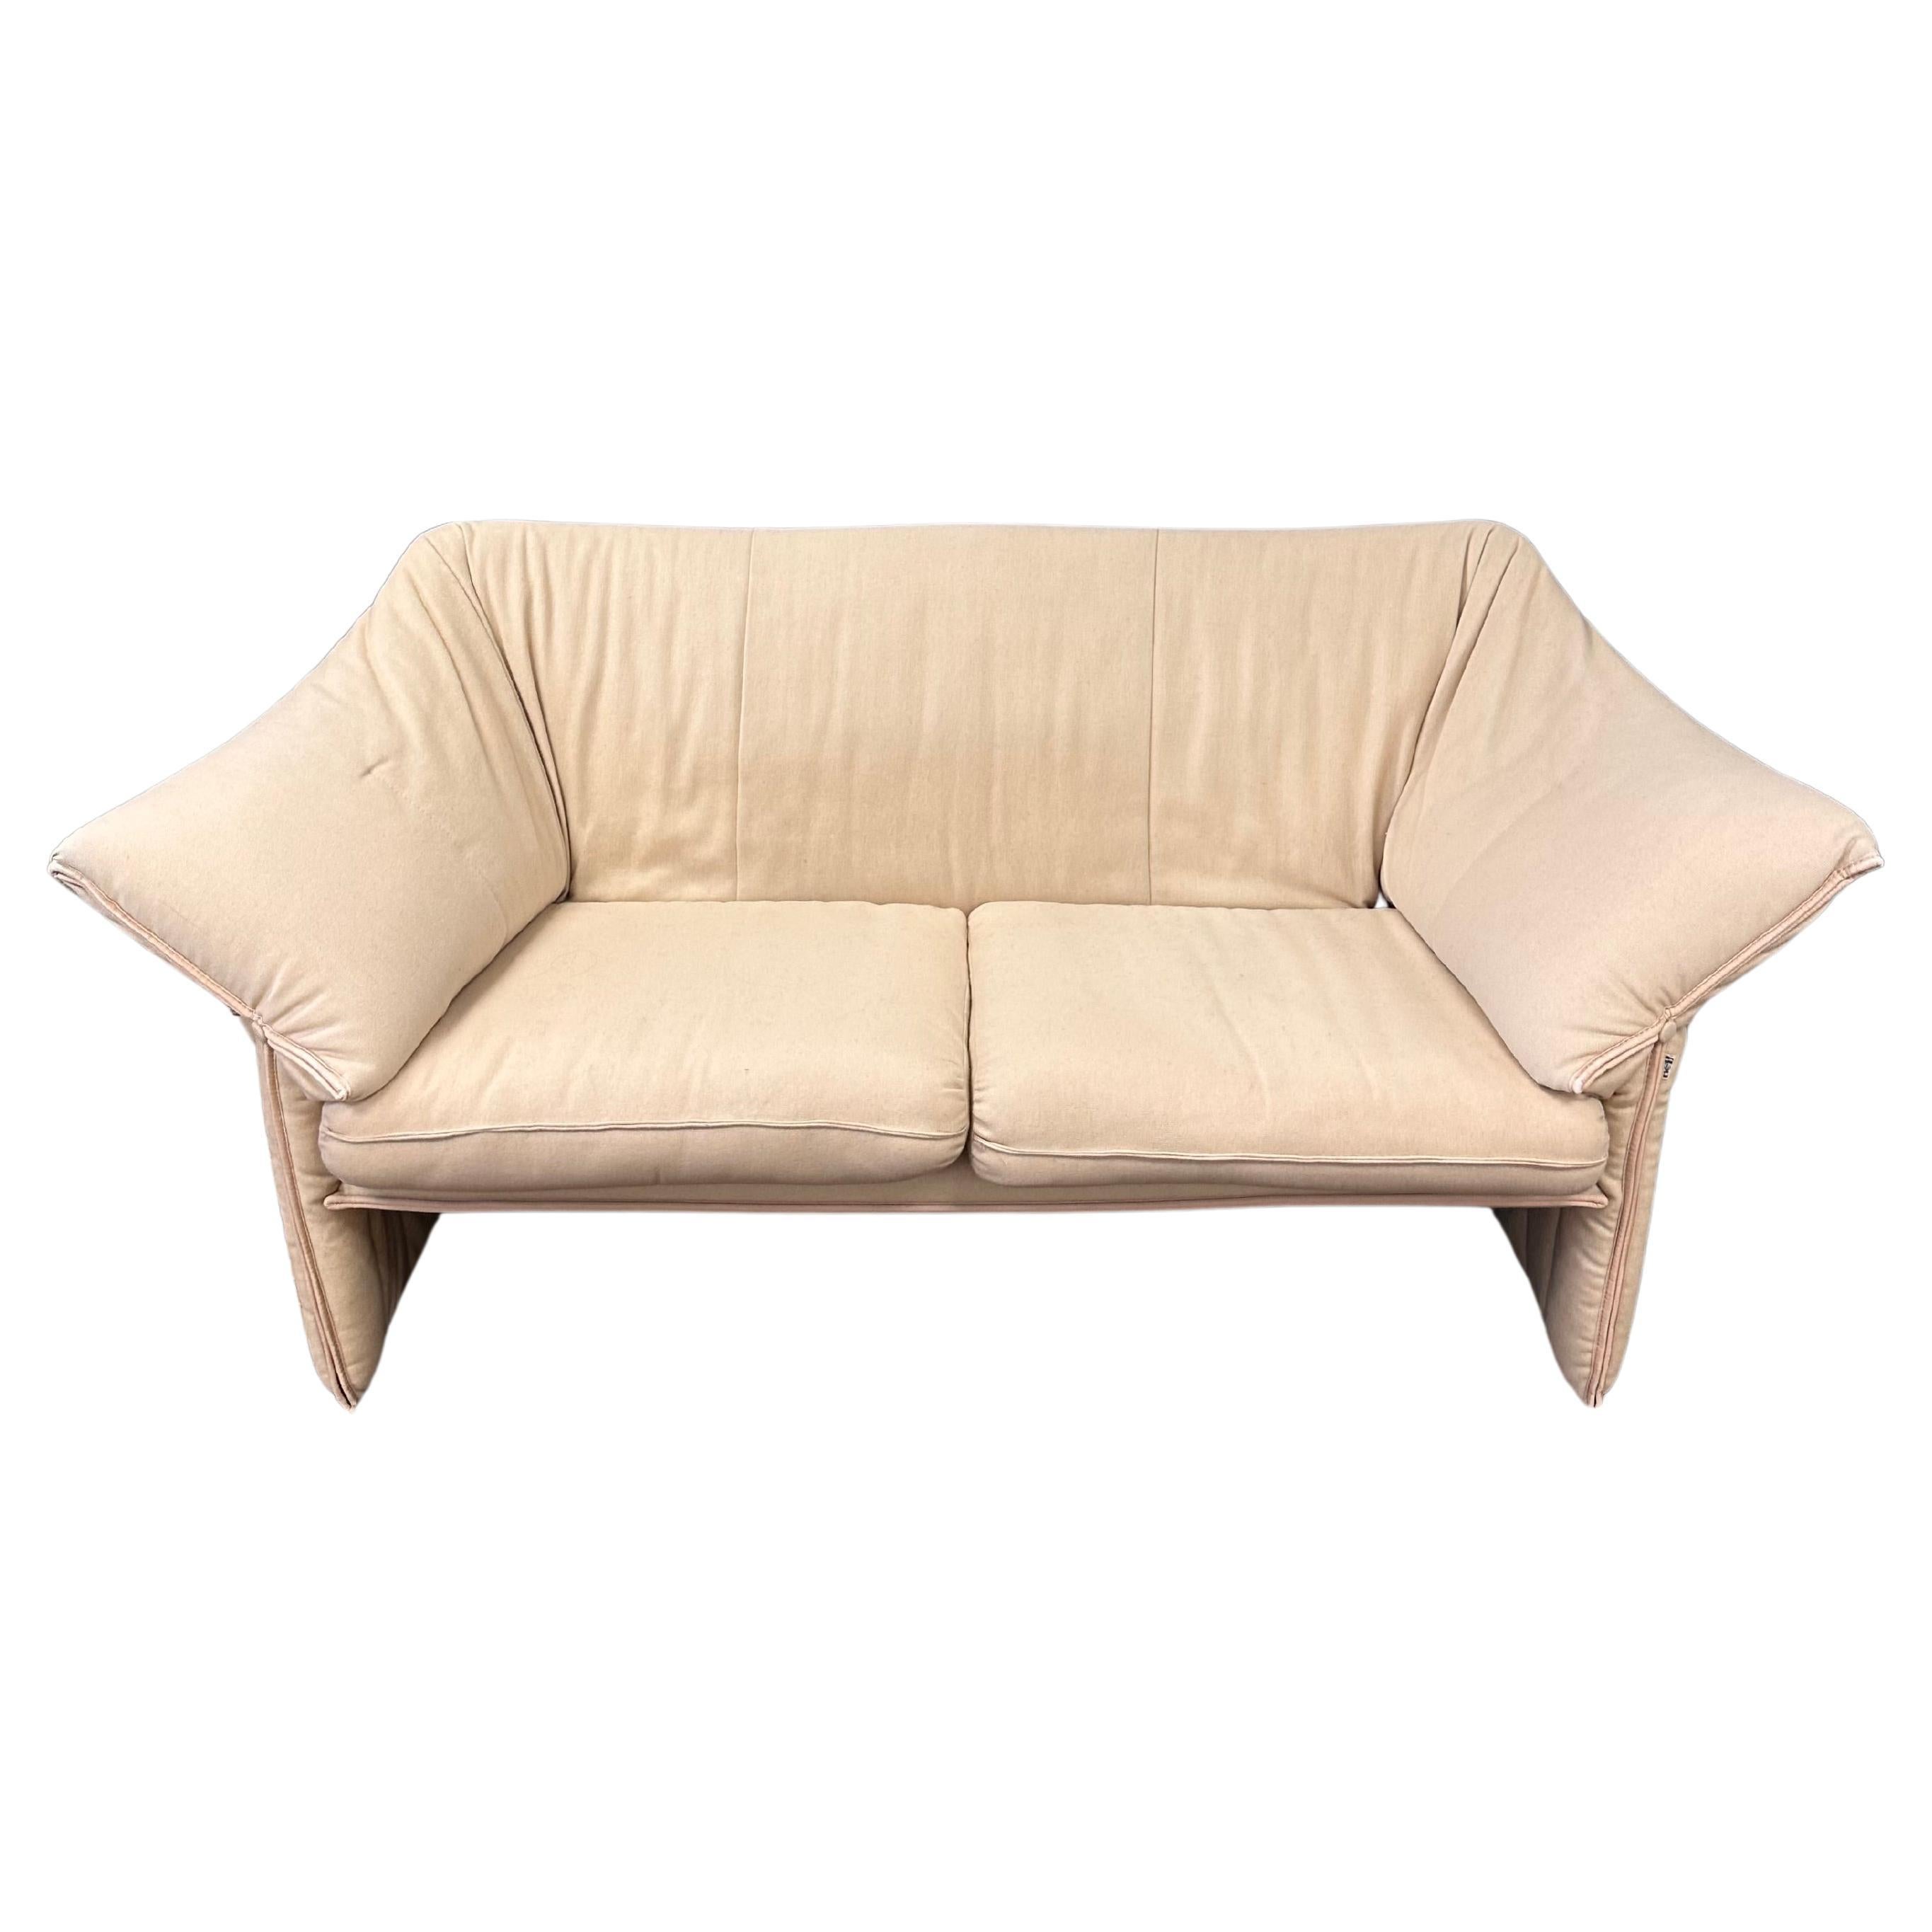 "Le Stelle" Loveseat by Mario Bellini for B&B Italia For Sale